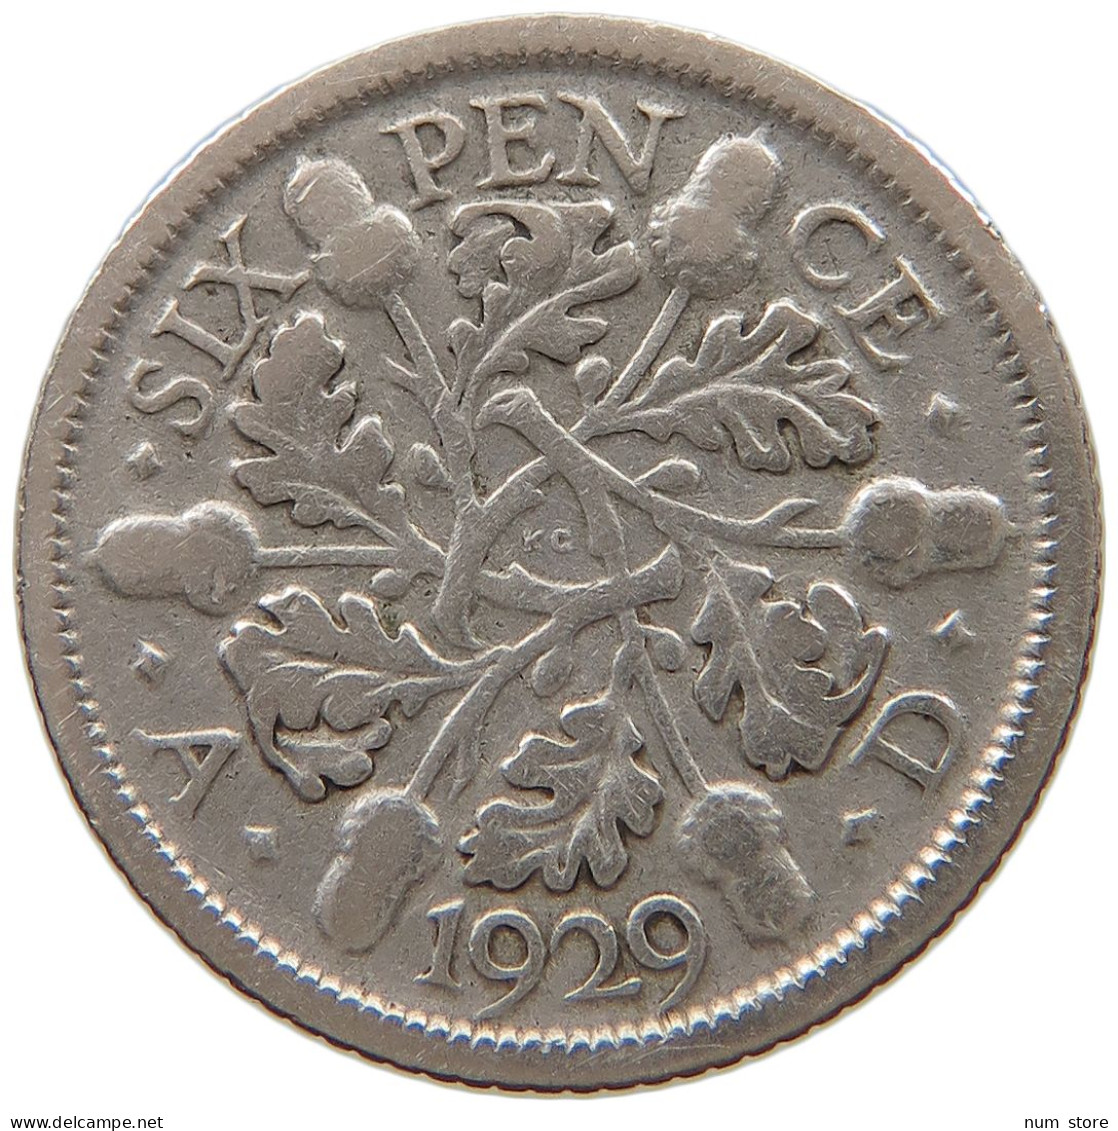 GREAT BRITAIN SIXPENCE 1929 #a057 0267 - H. 6 Pence